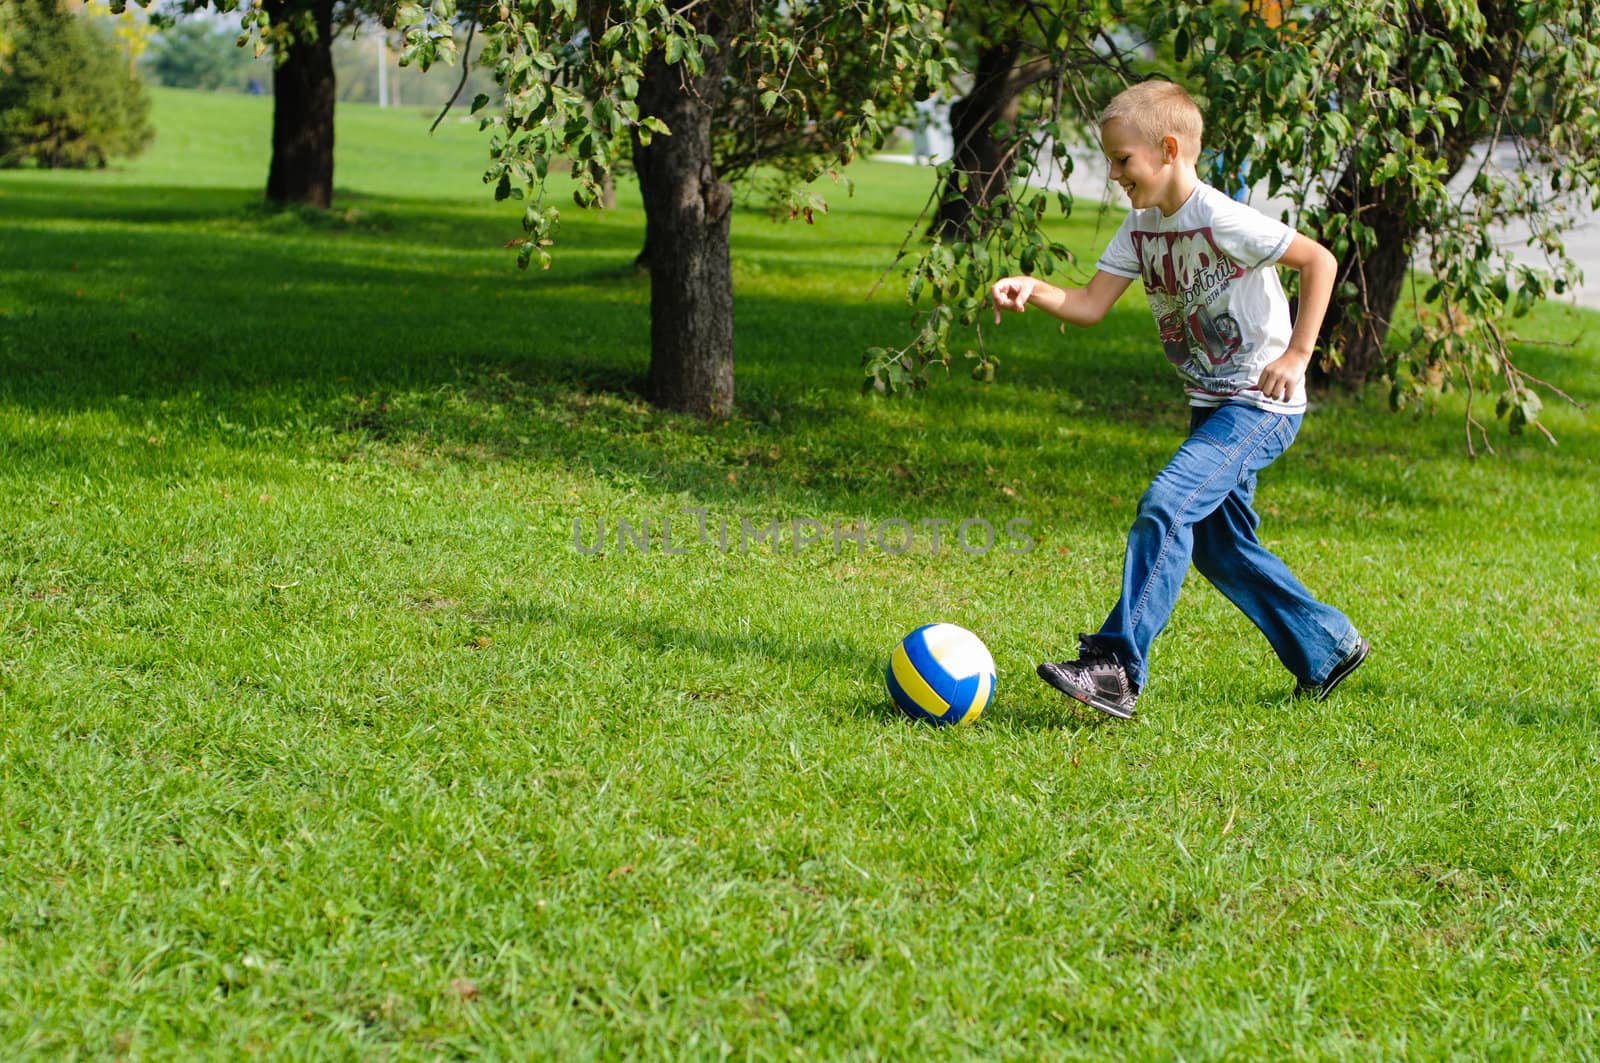 Young boy playing with his ball in the grass outdoors